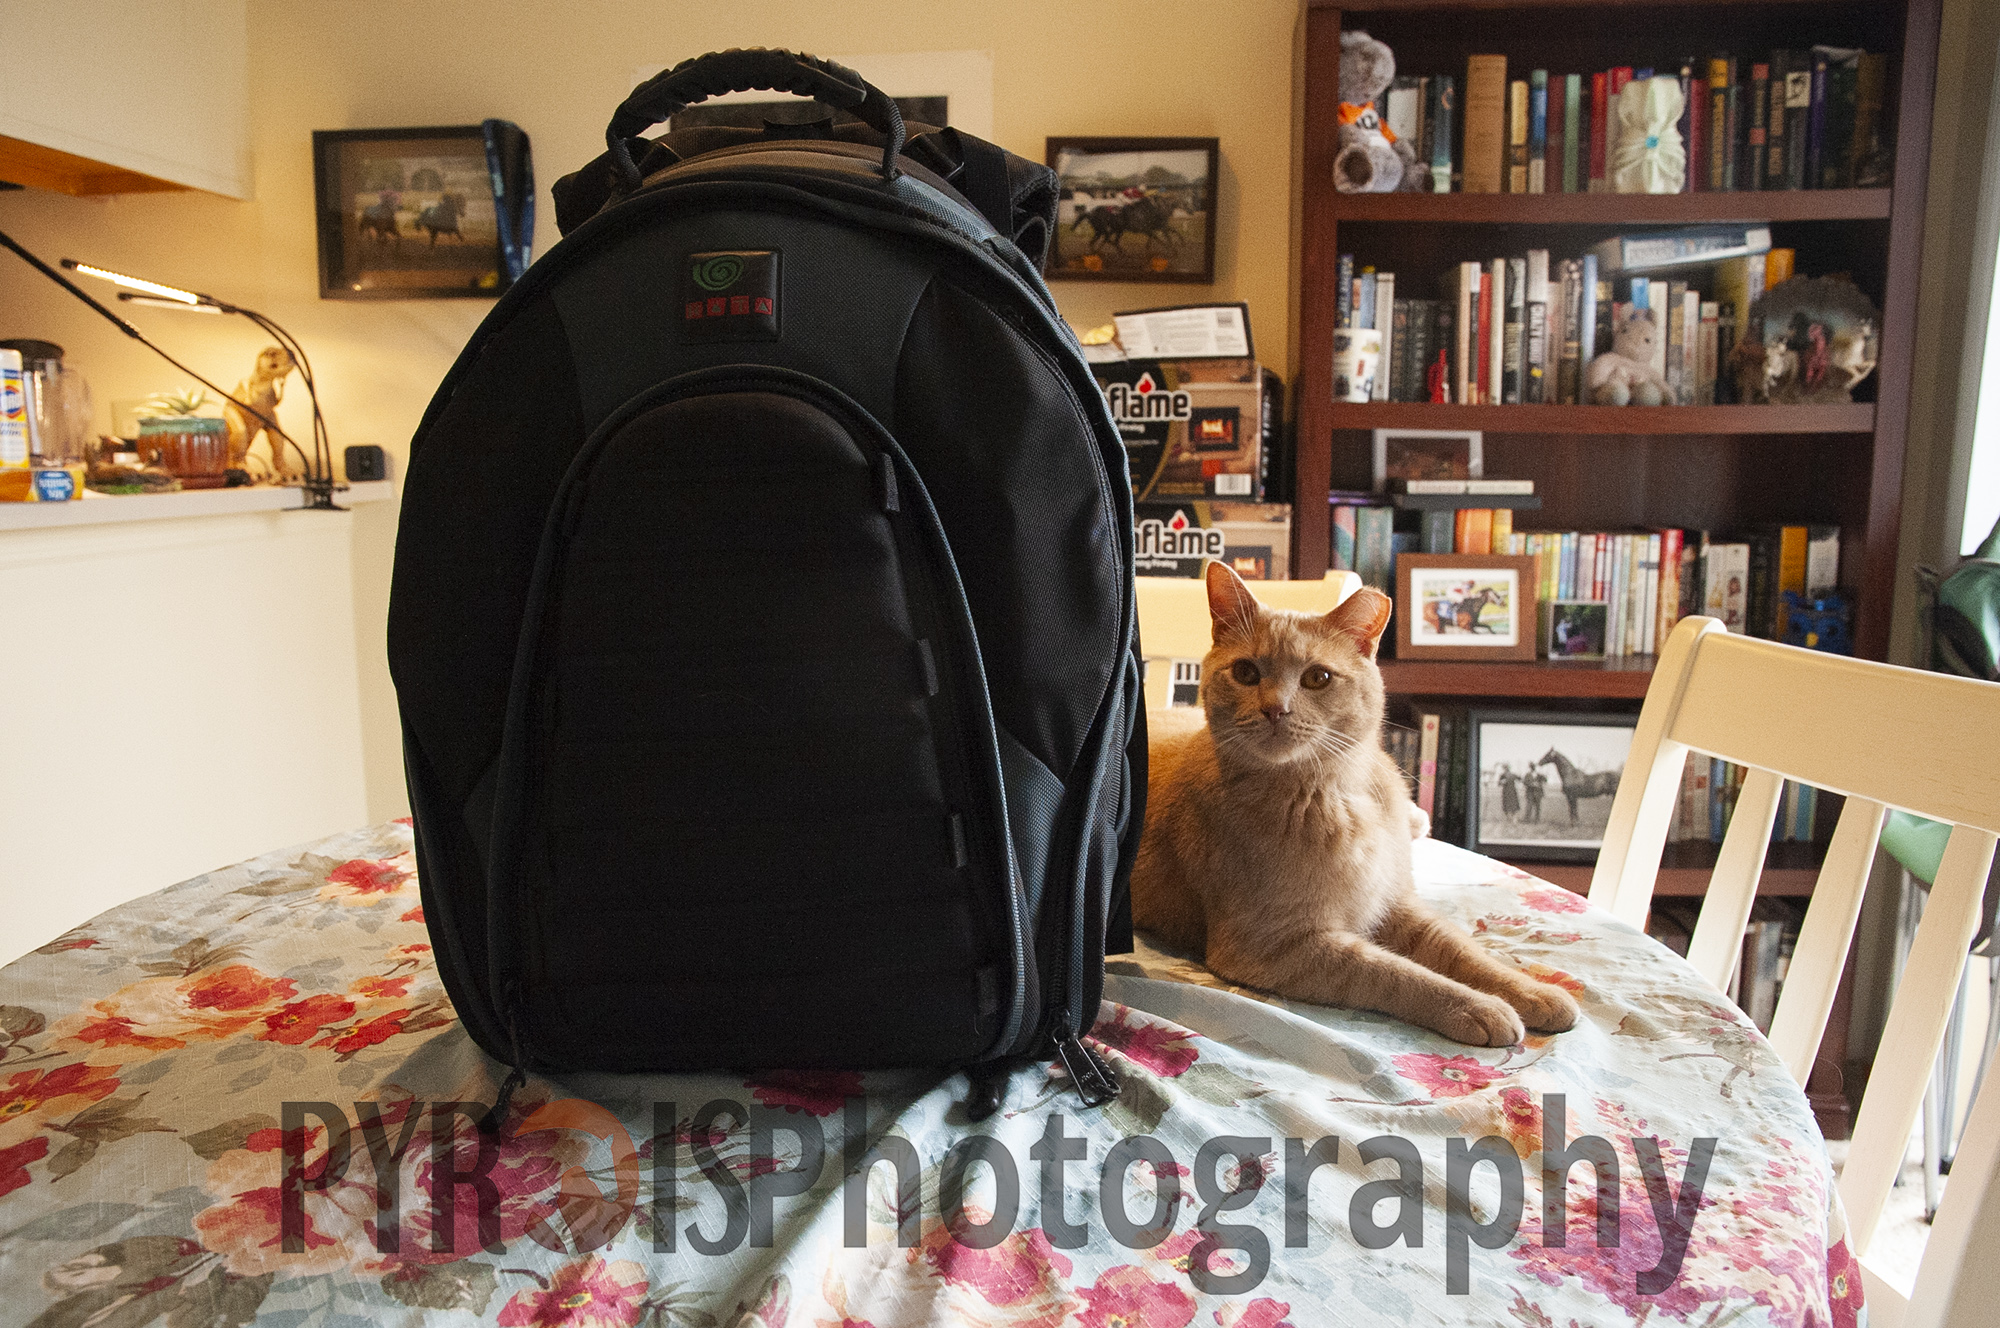 The Pyrois Media camera bag and Bentley the cat.